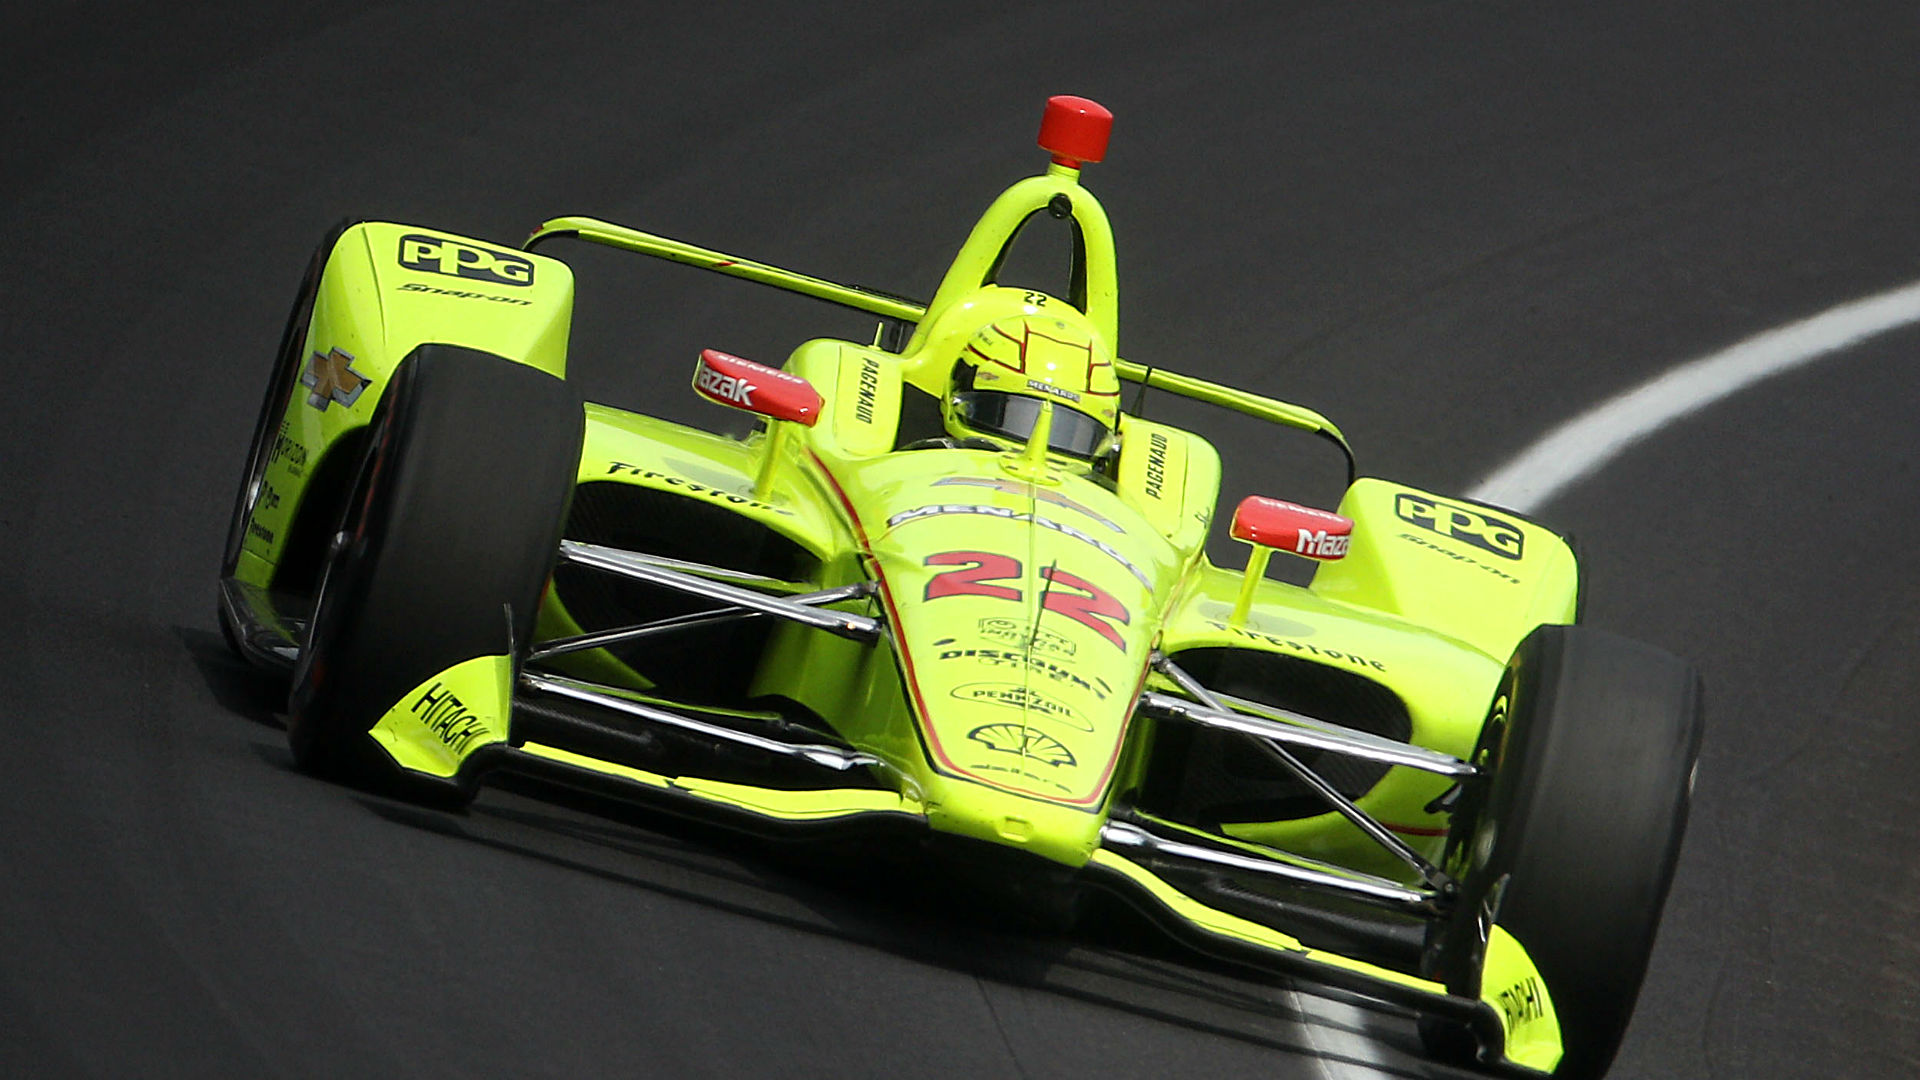 Indy 500: Live race updates, results, highlights from Indianapolis Motor Speedway